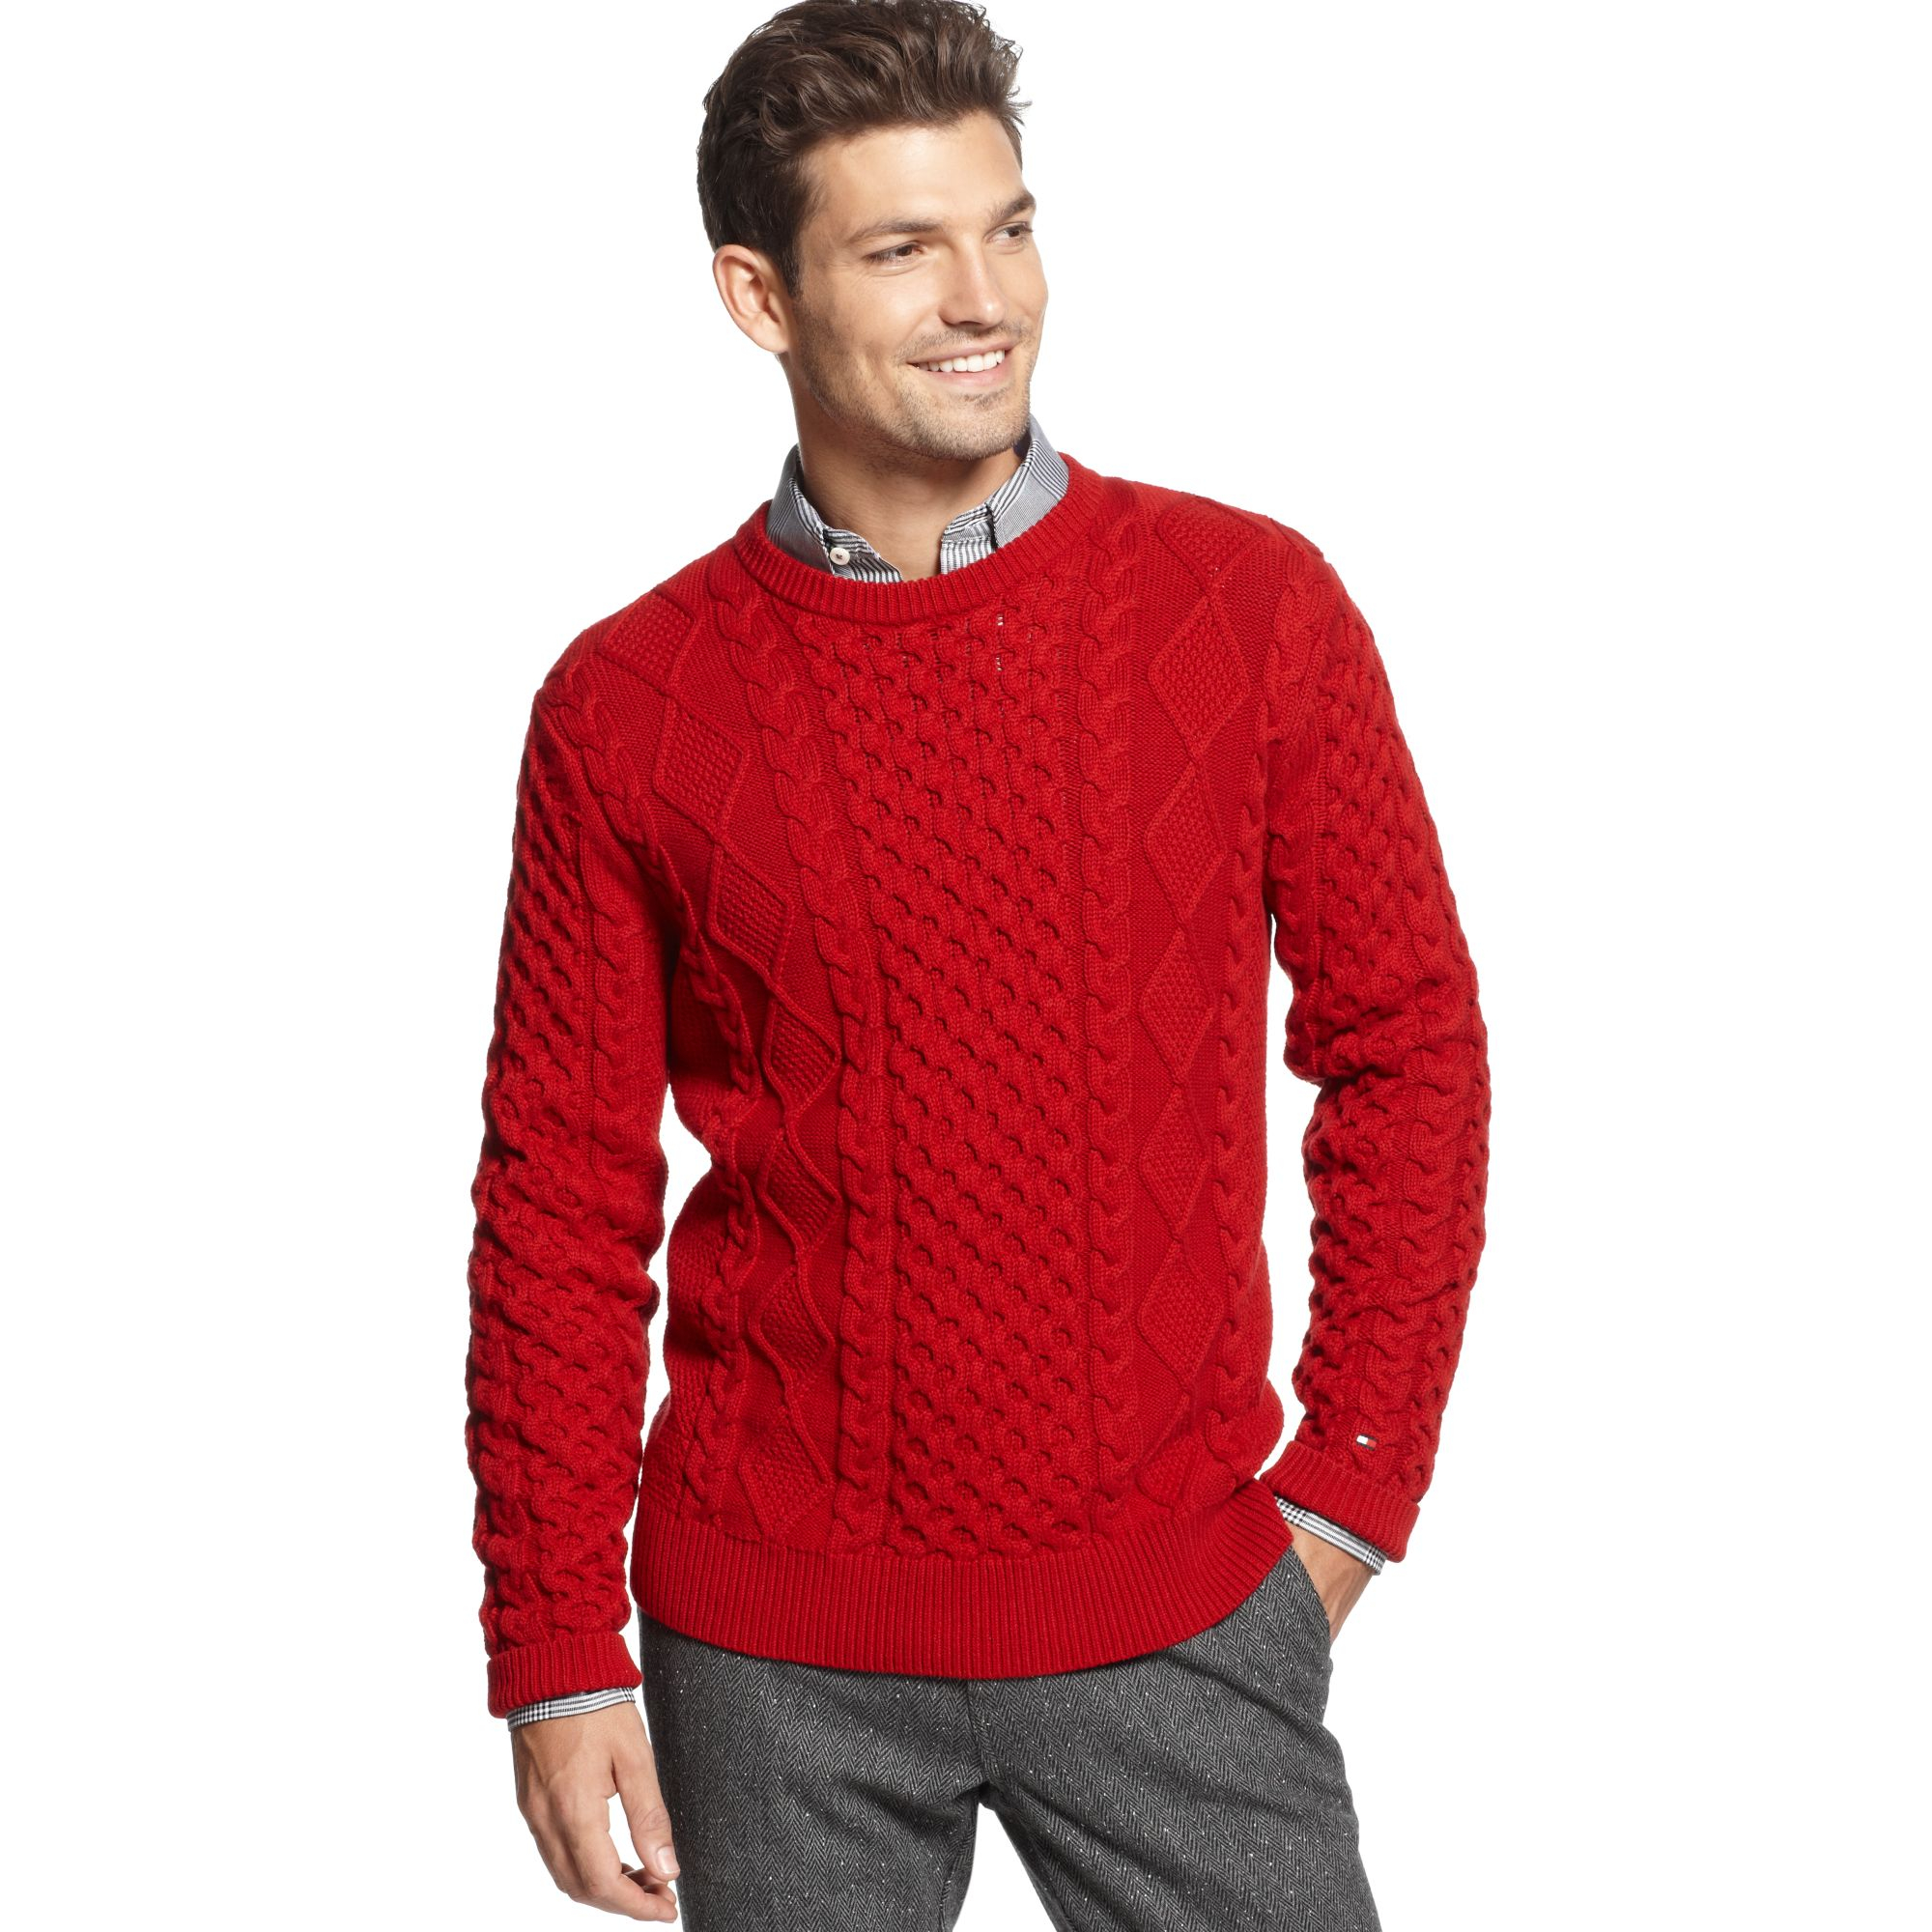 Lyst - Tommy Hilfiger knitwear crew neck in Red for Men